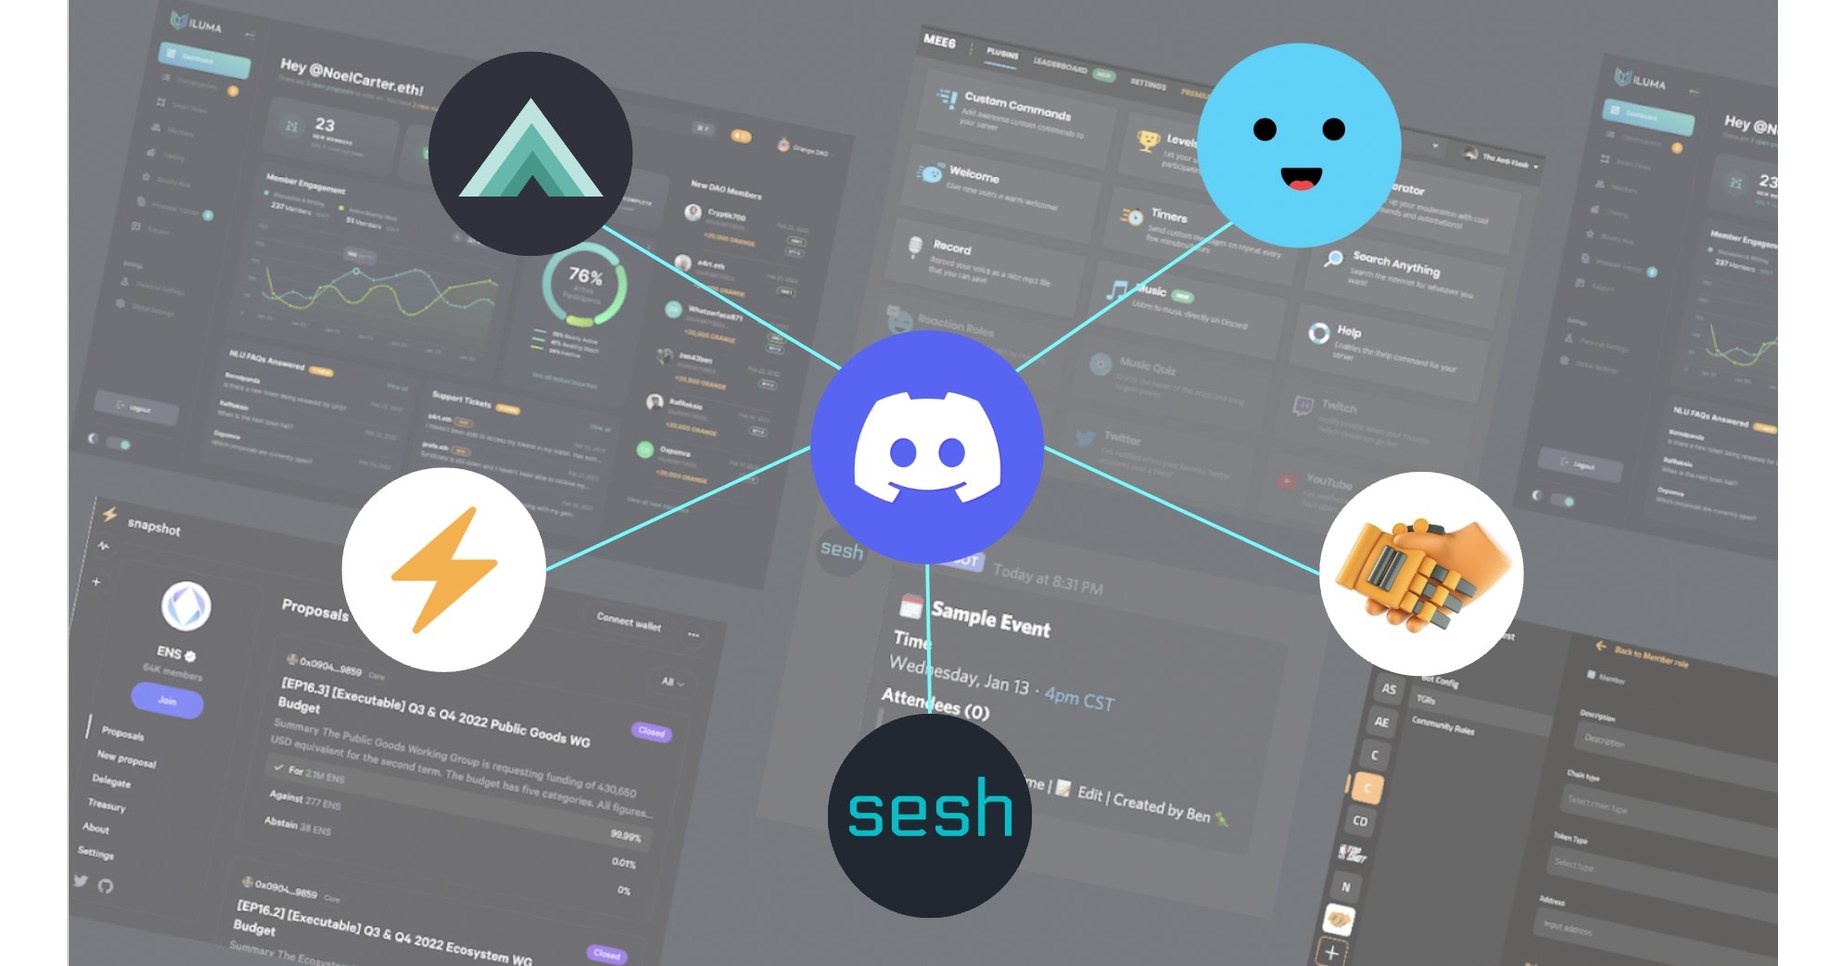 Seed Club - Discord Server for Web3, Venture-capital